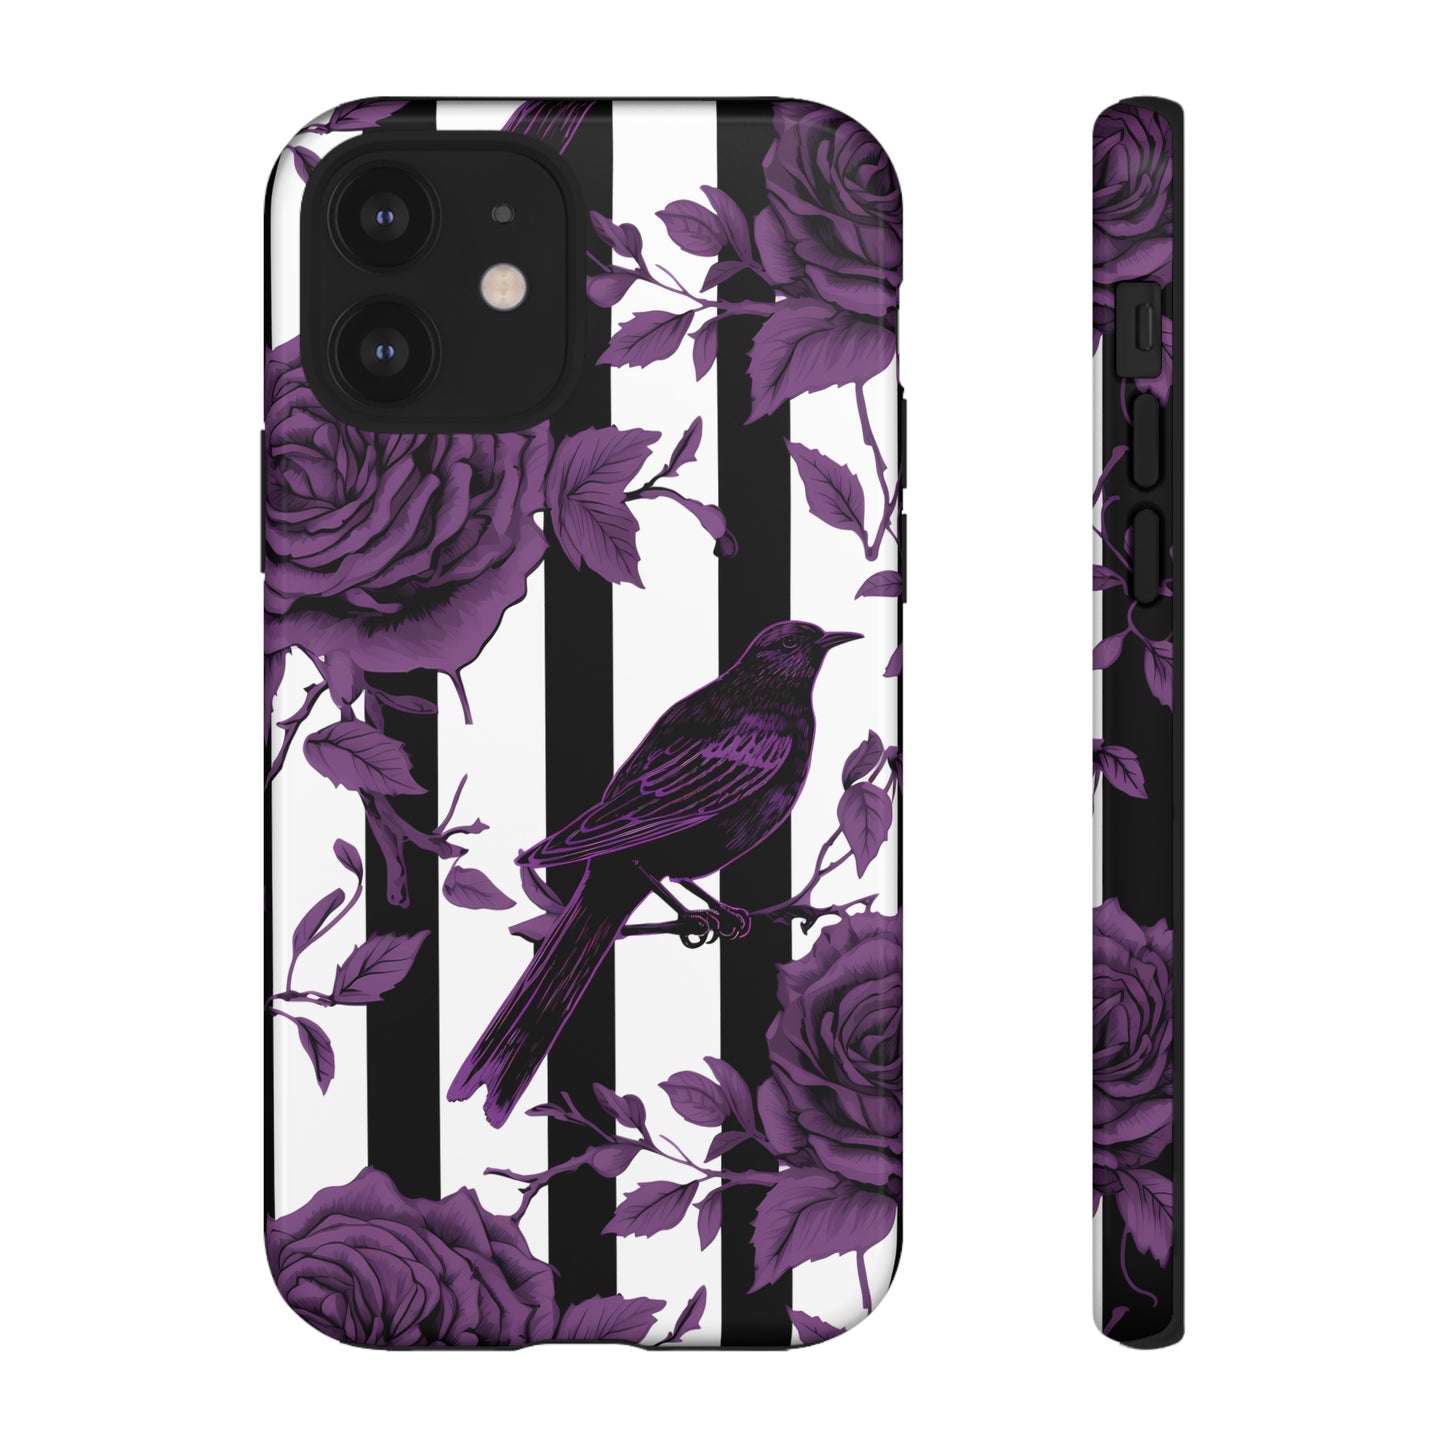 Striped Crows and Roses Tough Cases for iPhone Samsung Google PhonesPhone CaseVTZdesignsiPhone 12GlossyAccessoriescrowsGlossy